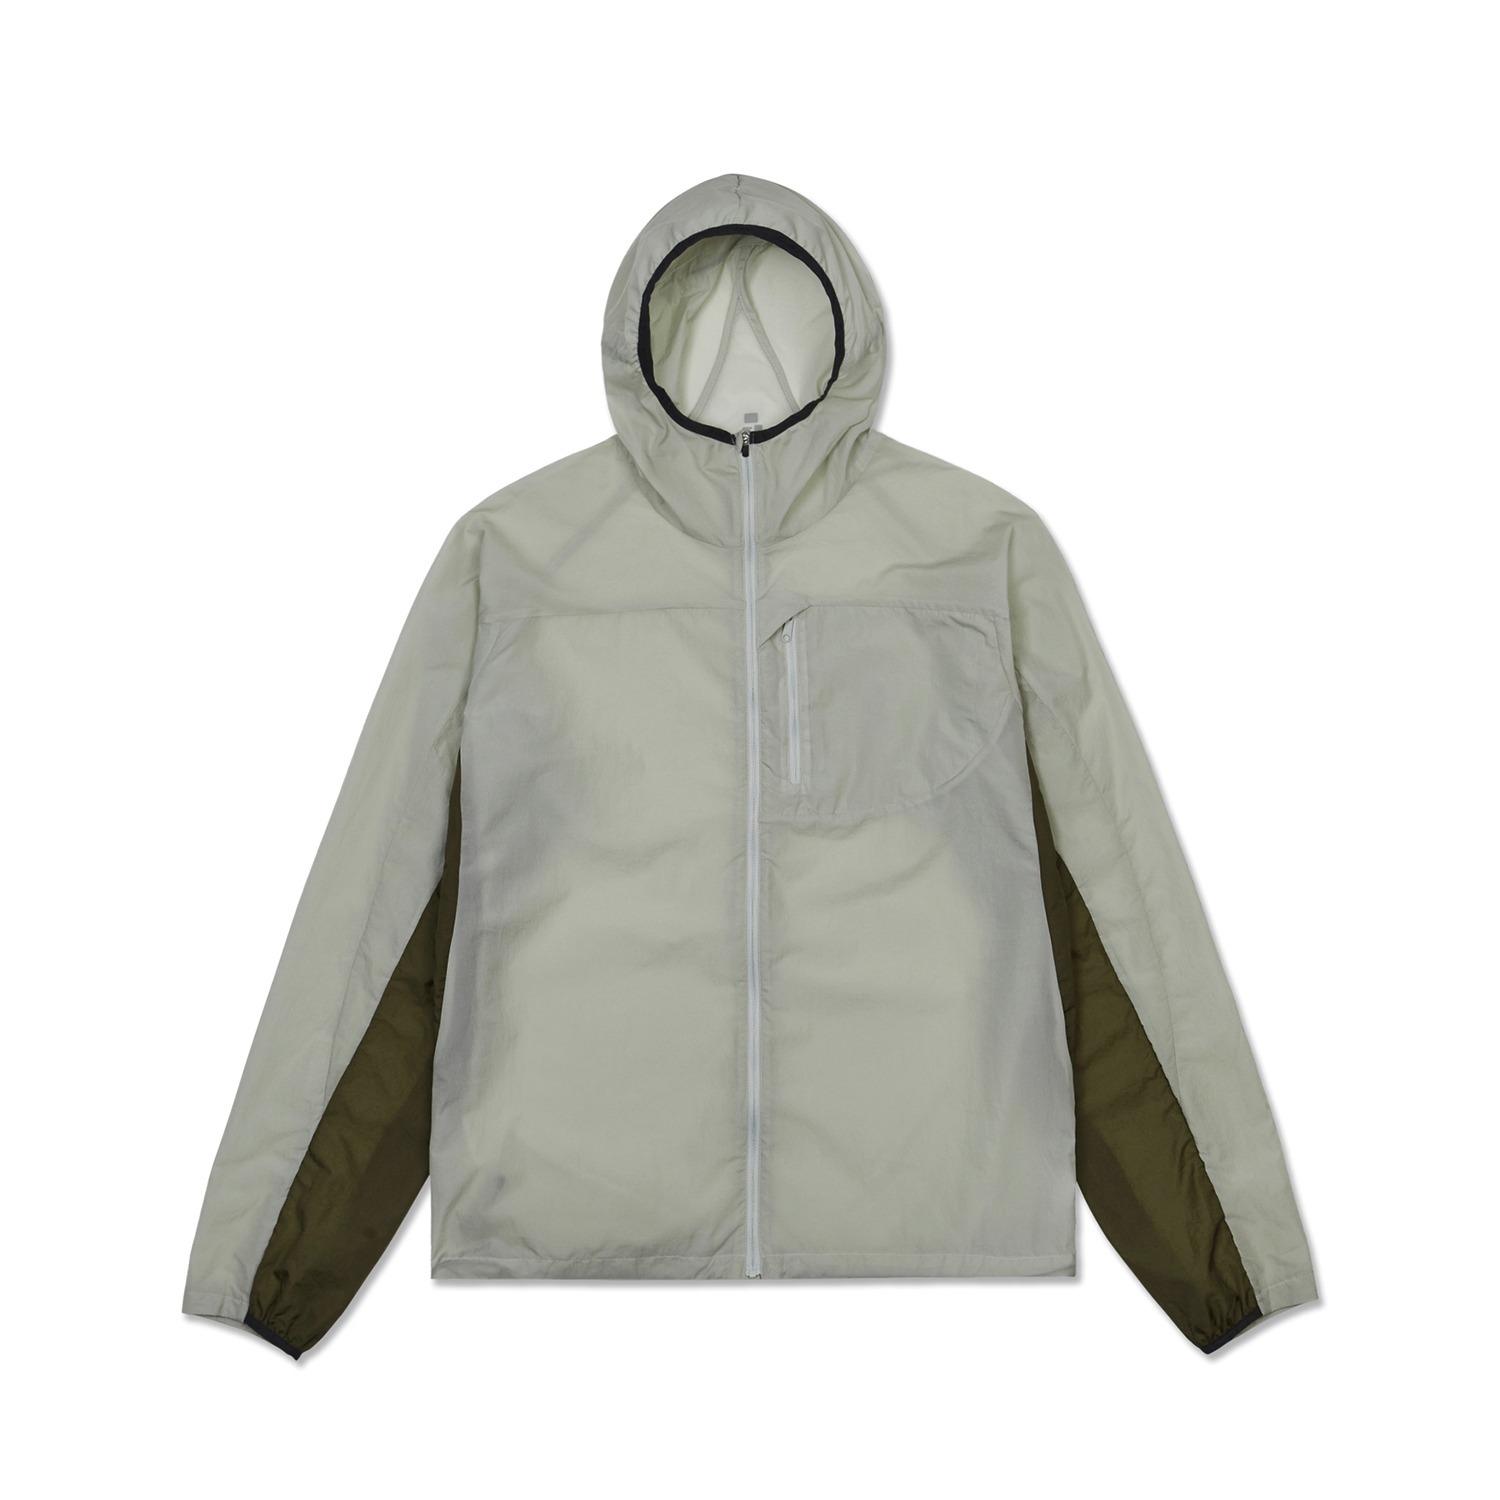 OUT OF ALL LIMONTA PACKABLE WINDSHELL HOODY JACKET-ZEPHYR BLUE[아웃오브올 리몬타 패커블 윈드쉘 후디 자켓-제퍼 블루]